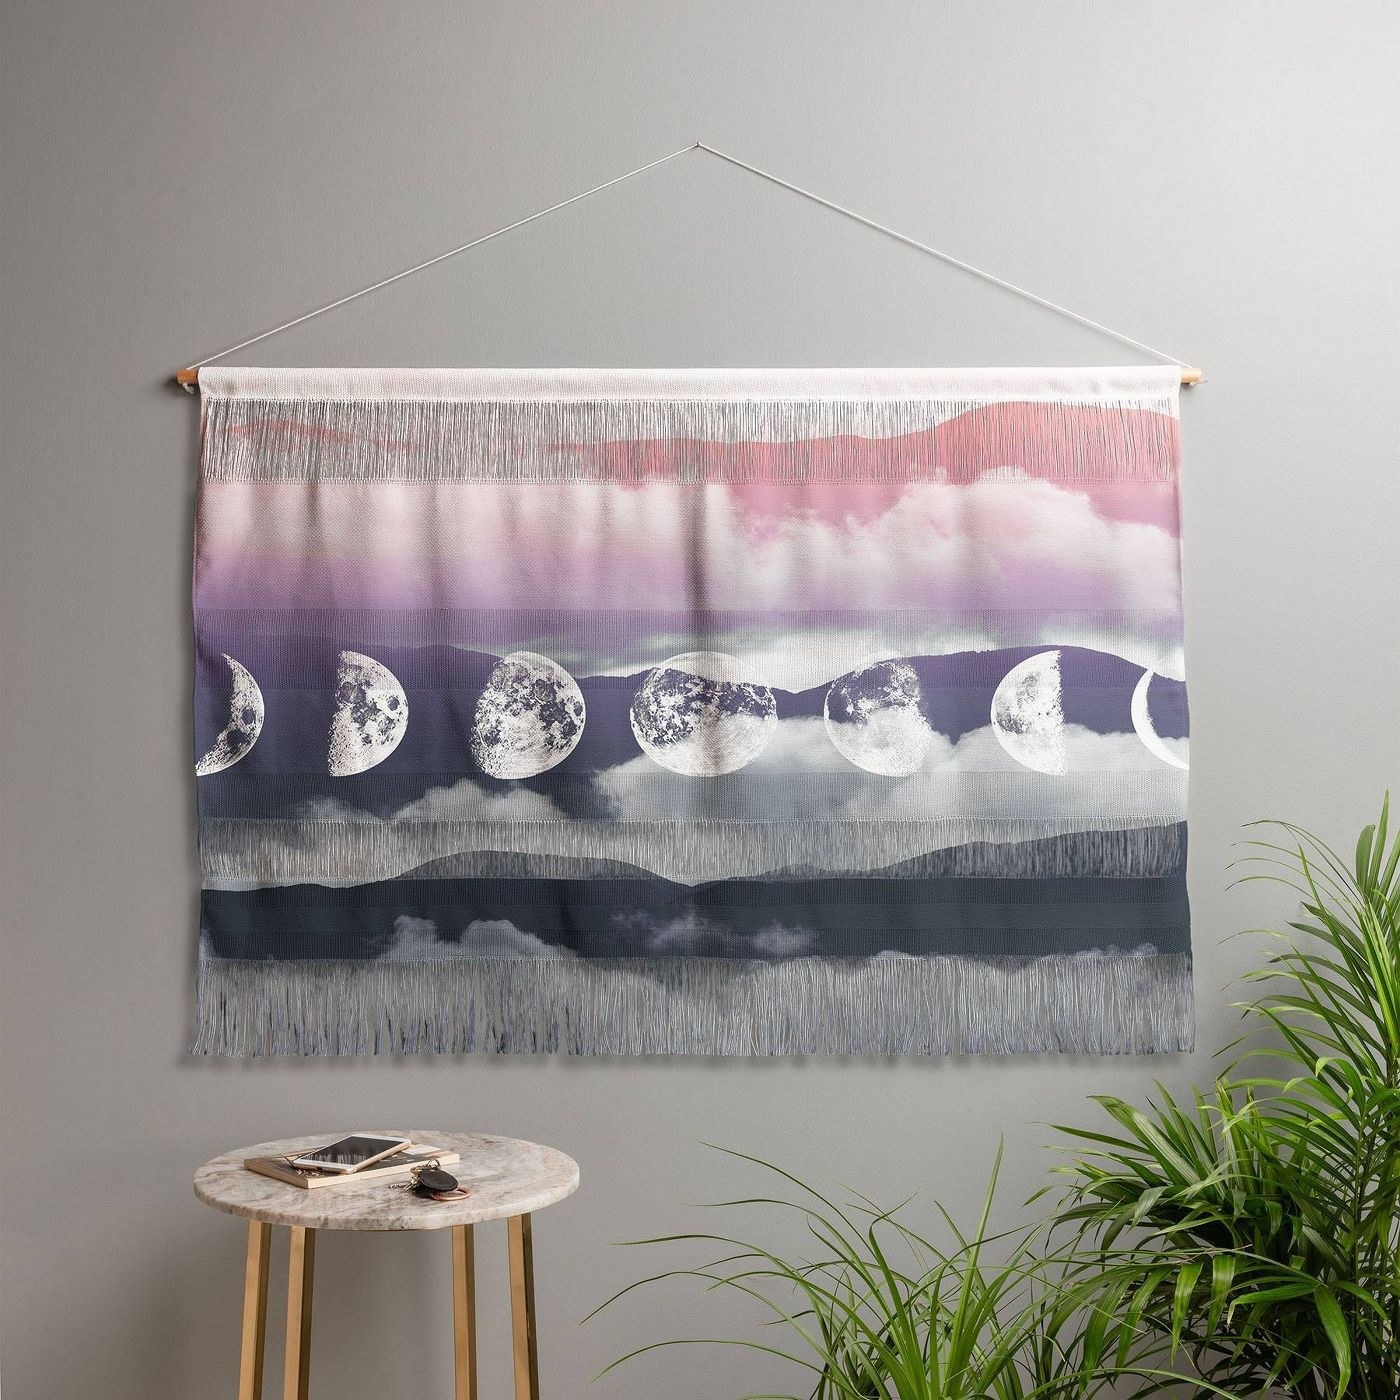 The tapestry hanging on a gray wall